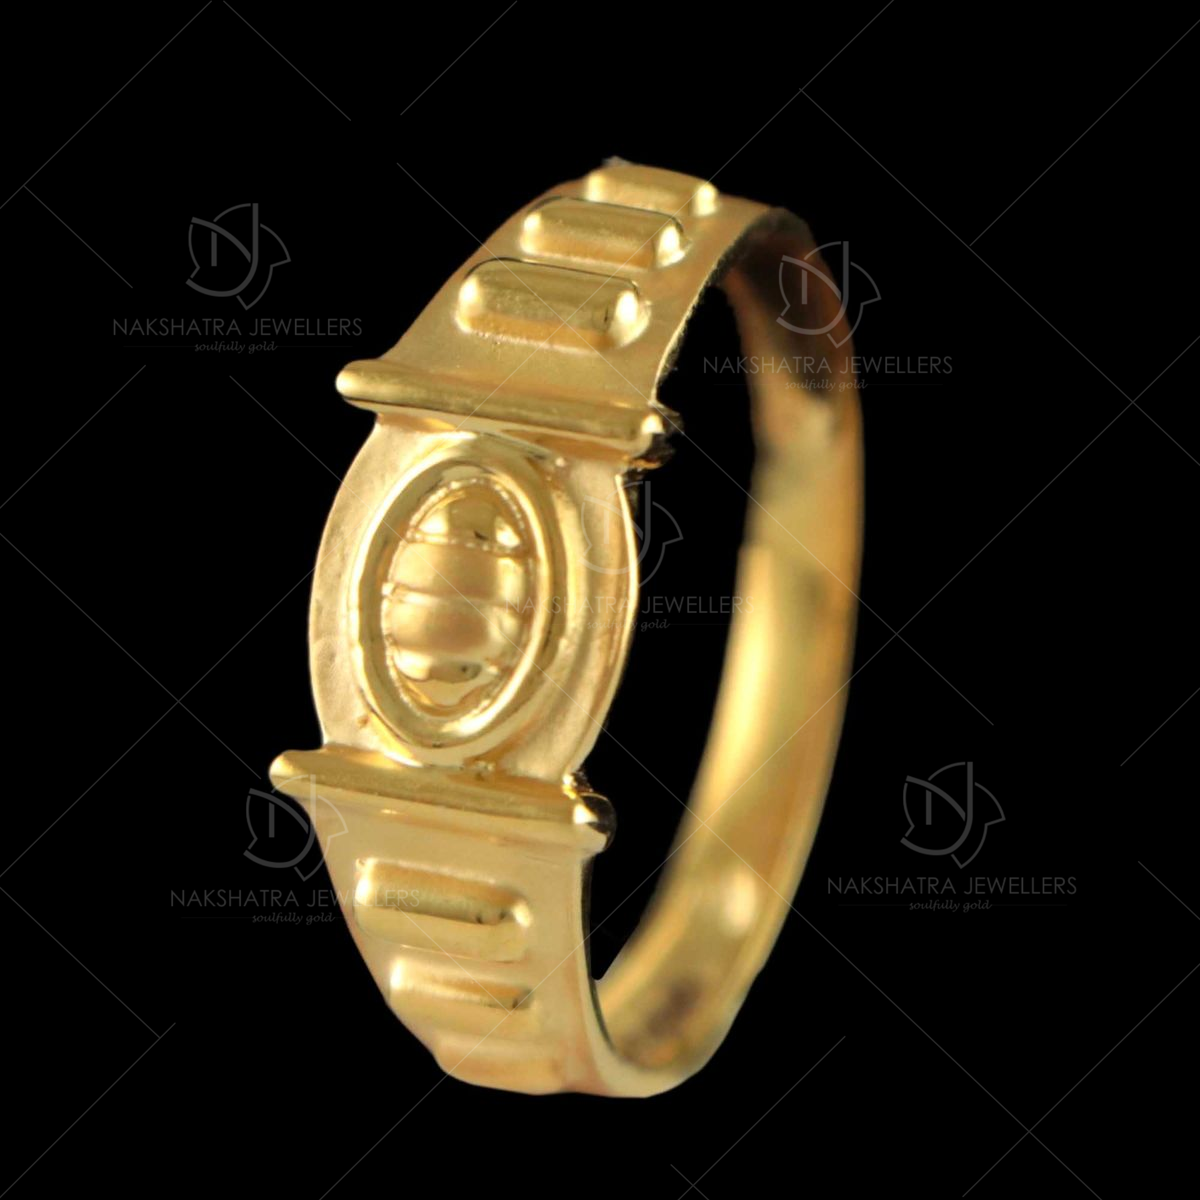 Online Jewellery Shop - Fancy Gents Casting Ring | Jewelry online shopping,  Rings, Ring collections